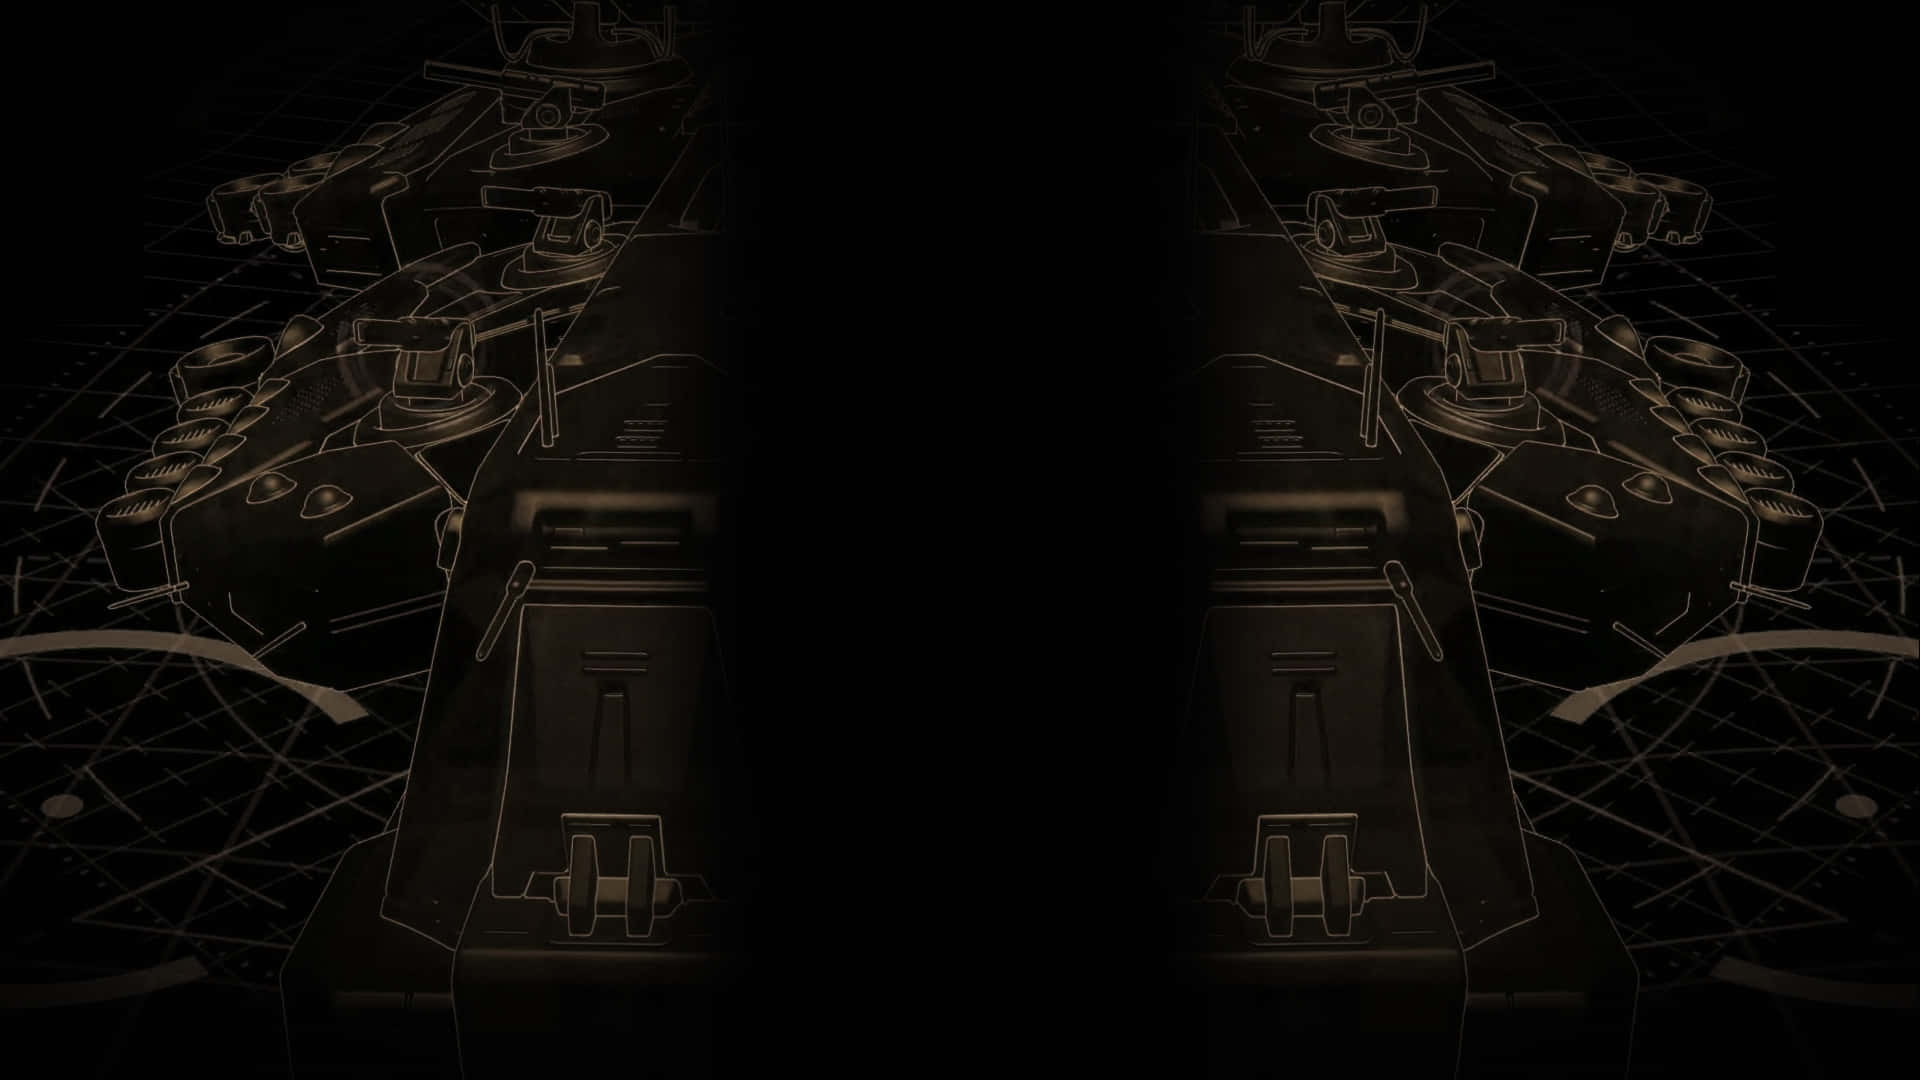 A Black And Gold Image Of A Machine